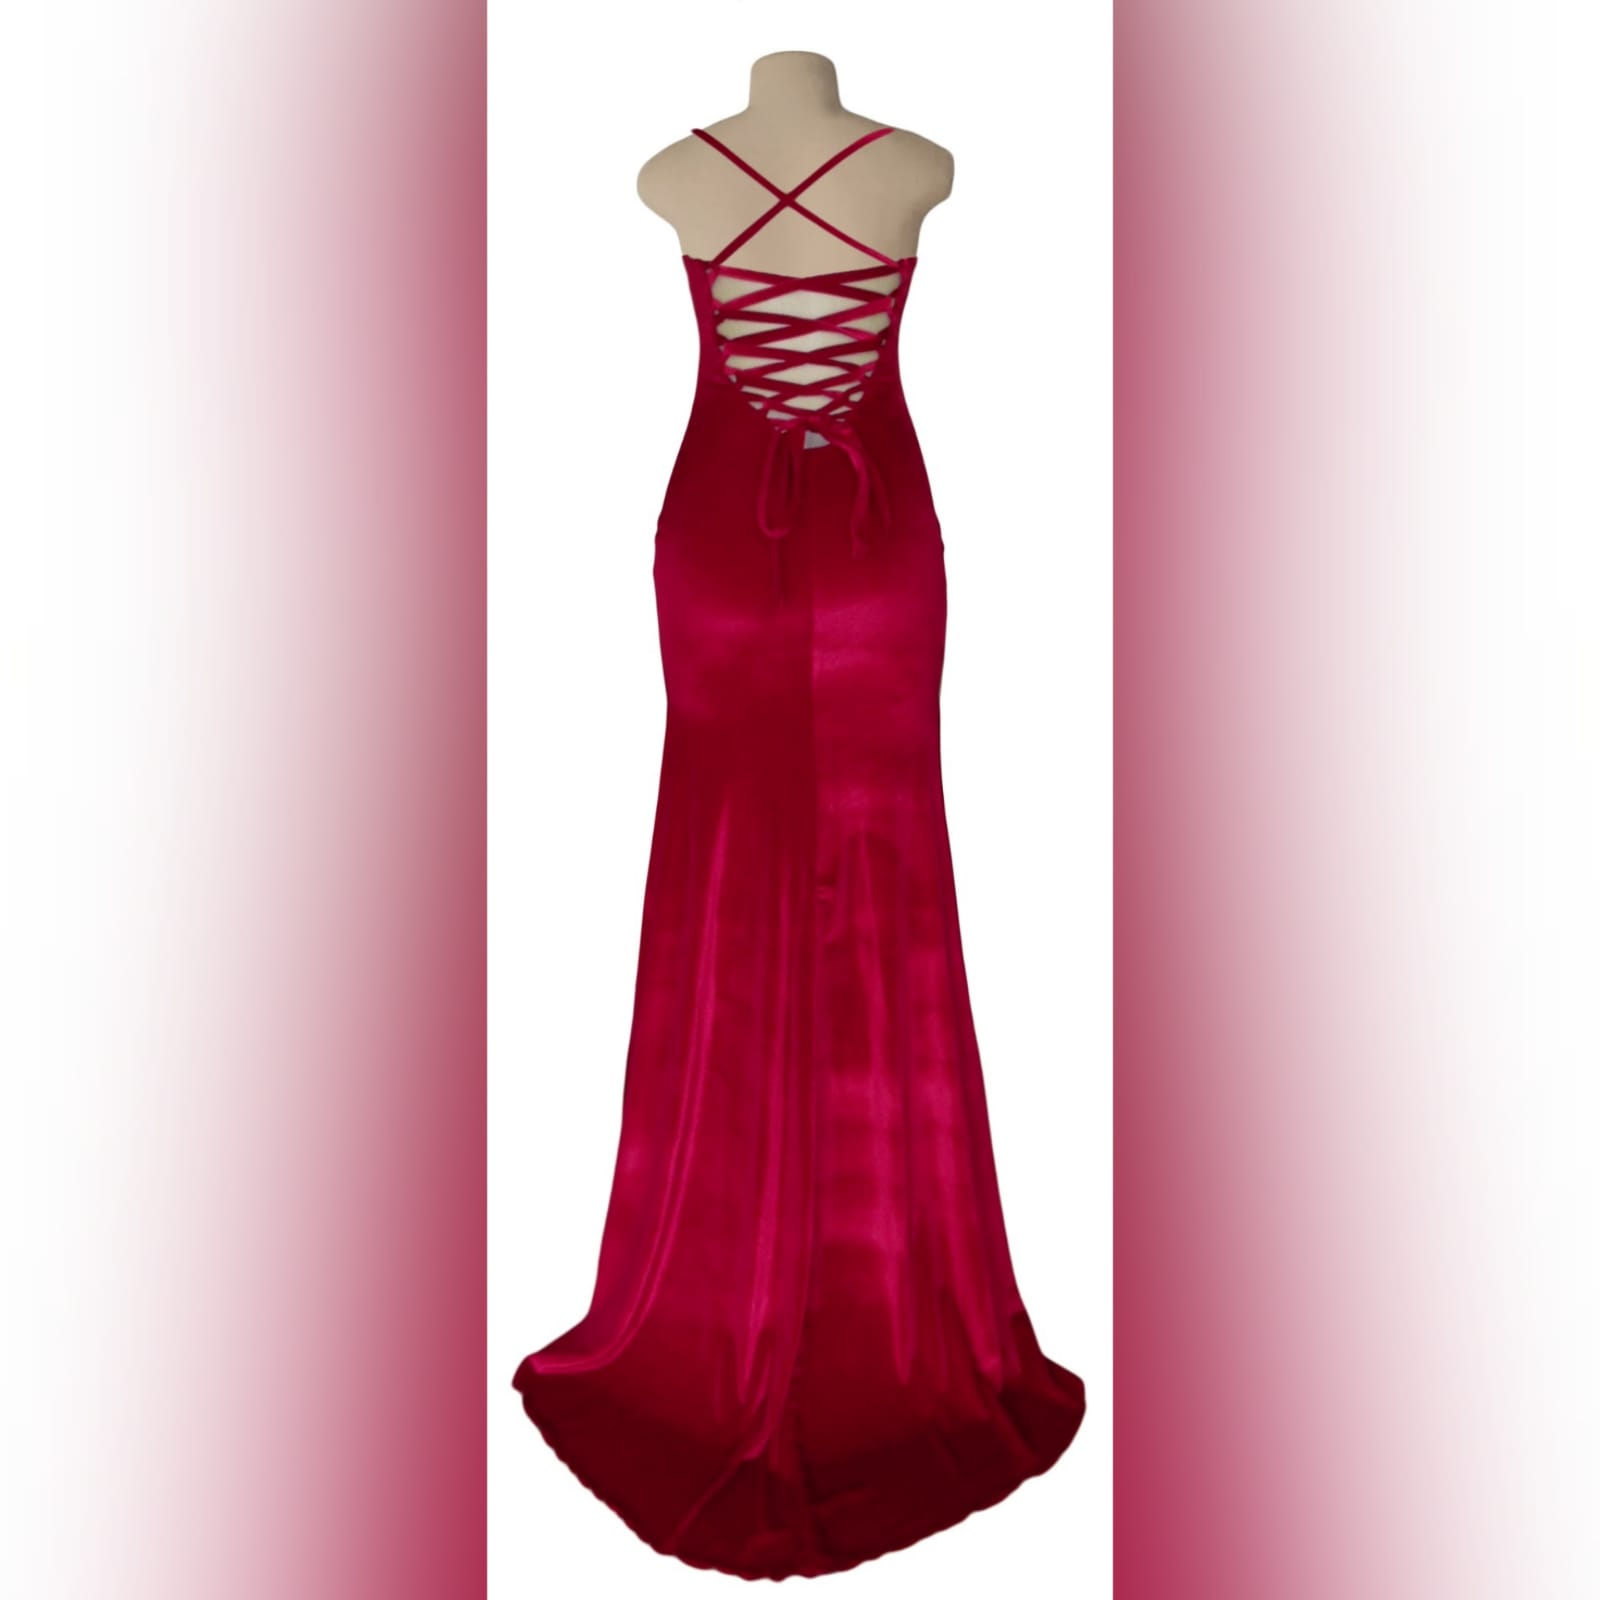 Red velvet long fitted evening party dress 2 red velvet long fitted evening party dress. This design has a laceup back which adds a stunning look to it and also helps adjust the dress fit. It has a high slit and a train for a dramatic effect.